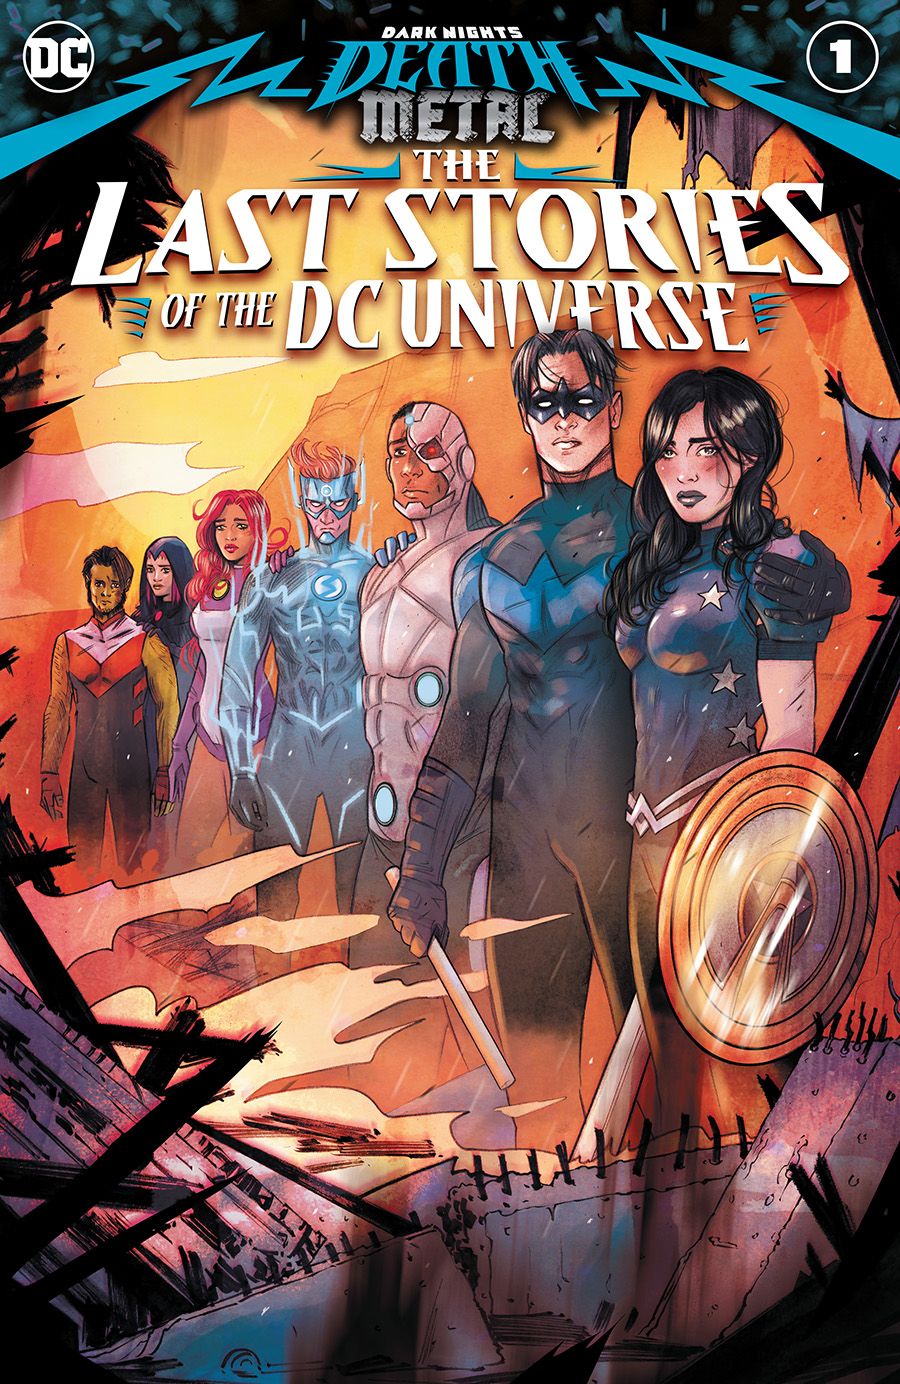 Dark Nights: Death Metal -  The Last Stories of the DC Universe #1 Comic